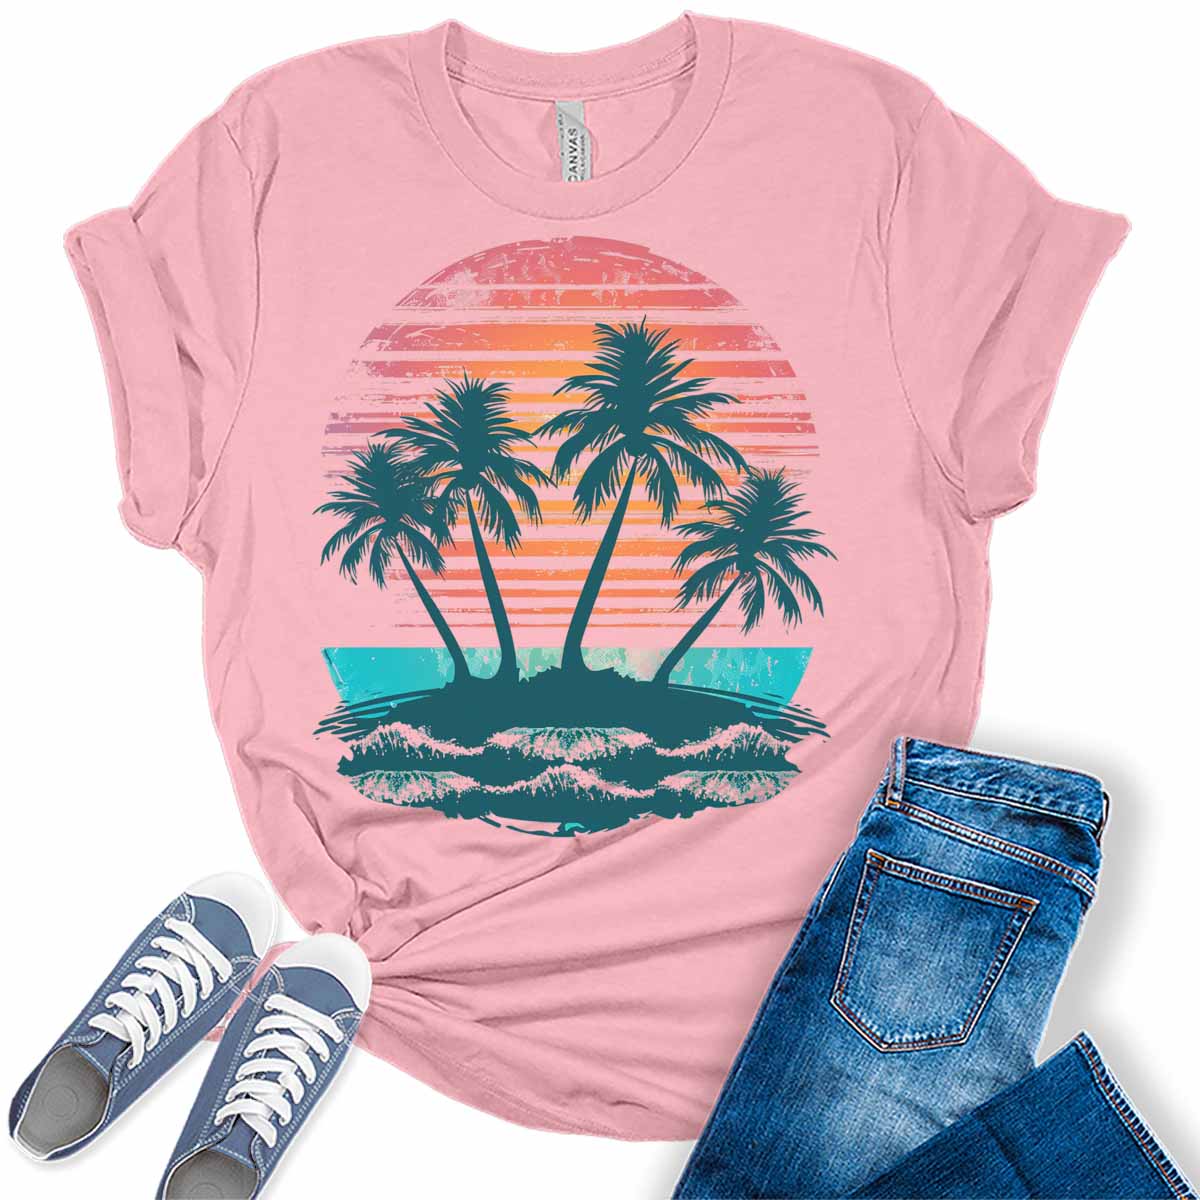 Womens Summer Tops Vintage Beach Shirts Trendy Plus Size Graphic Tees